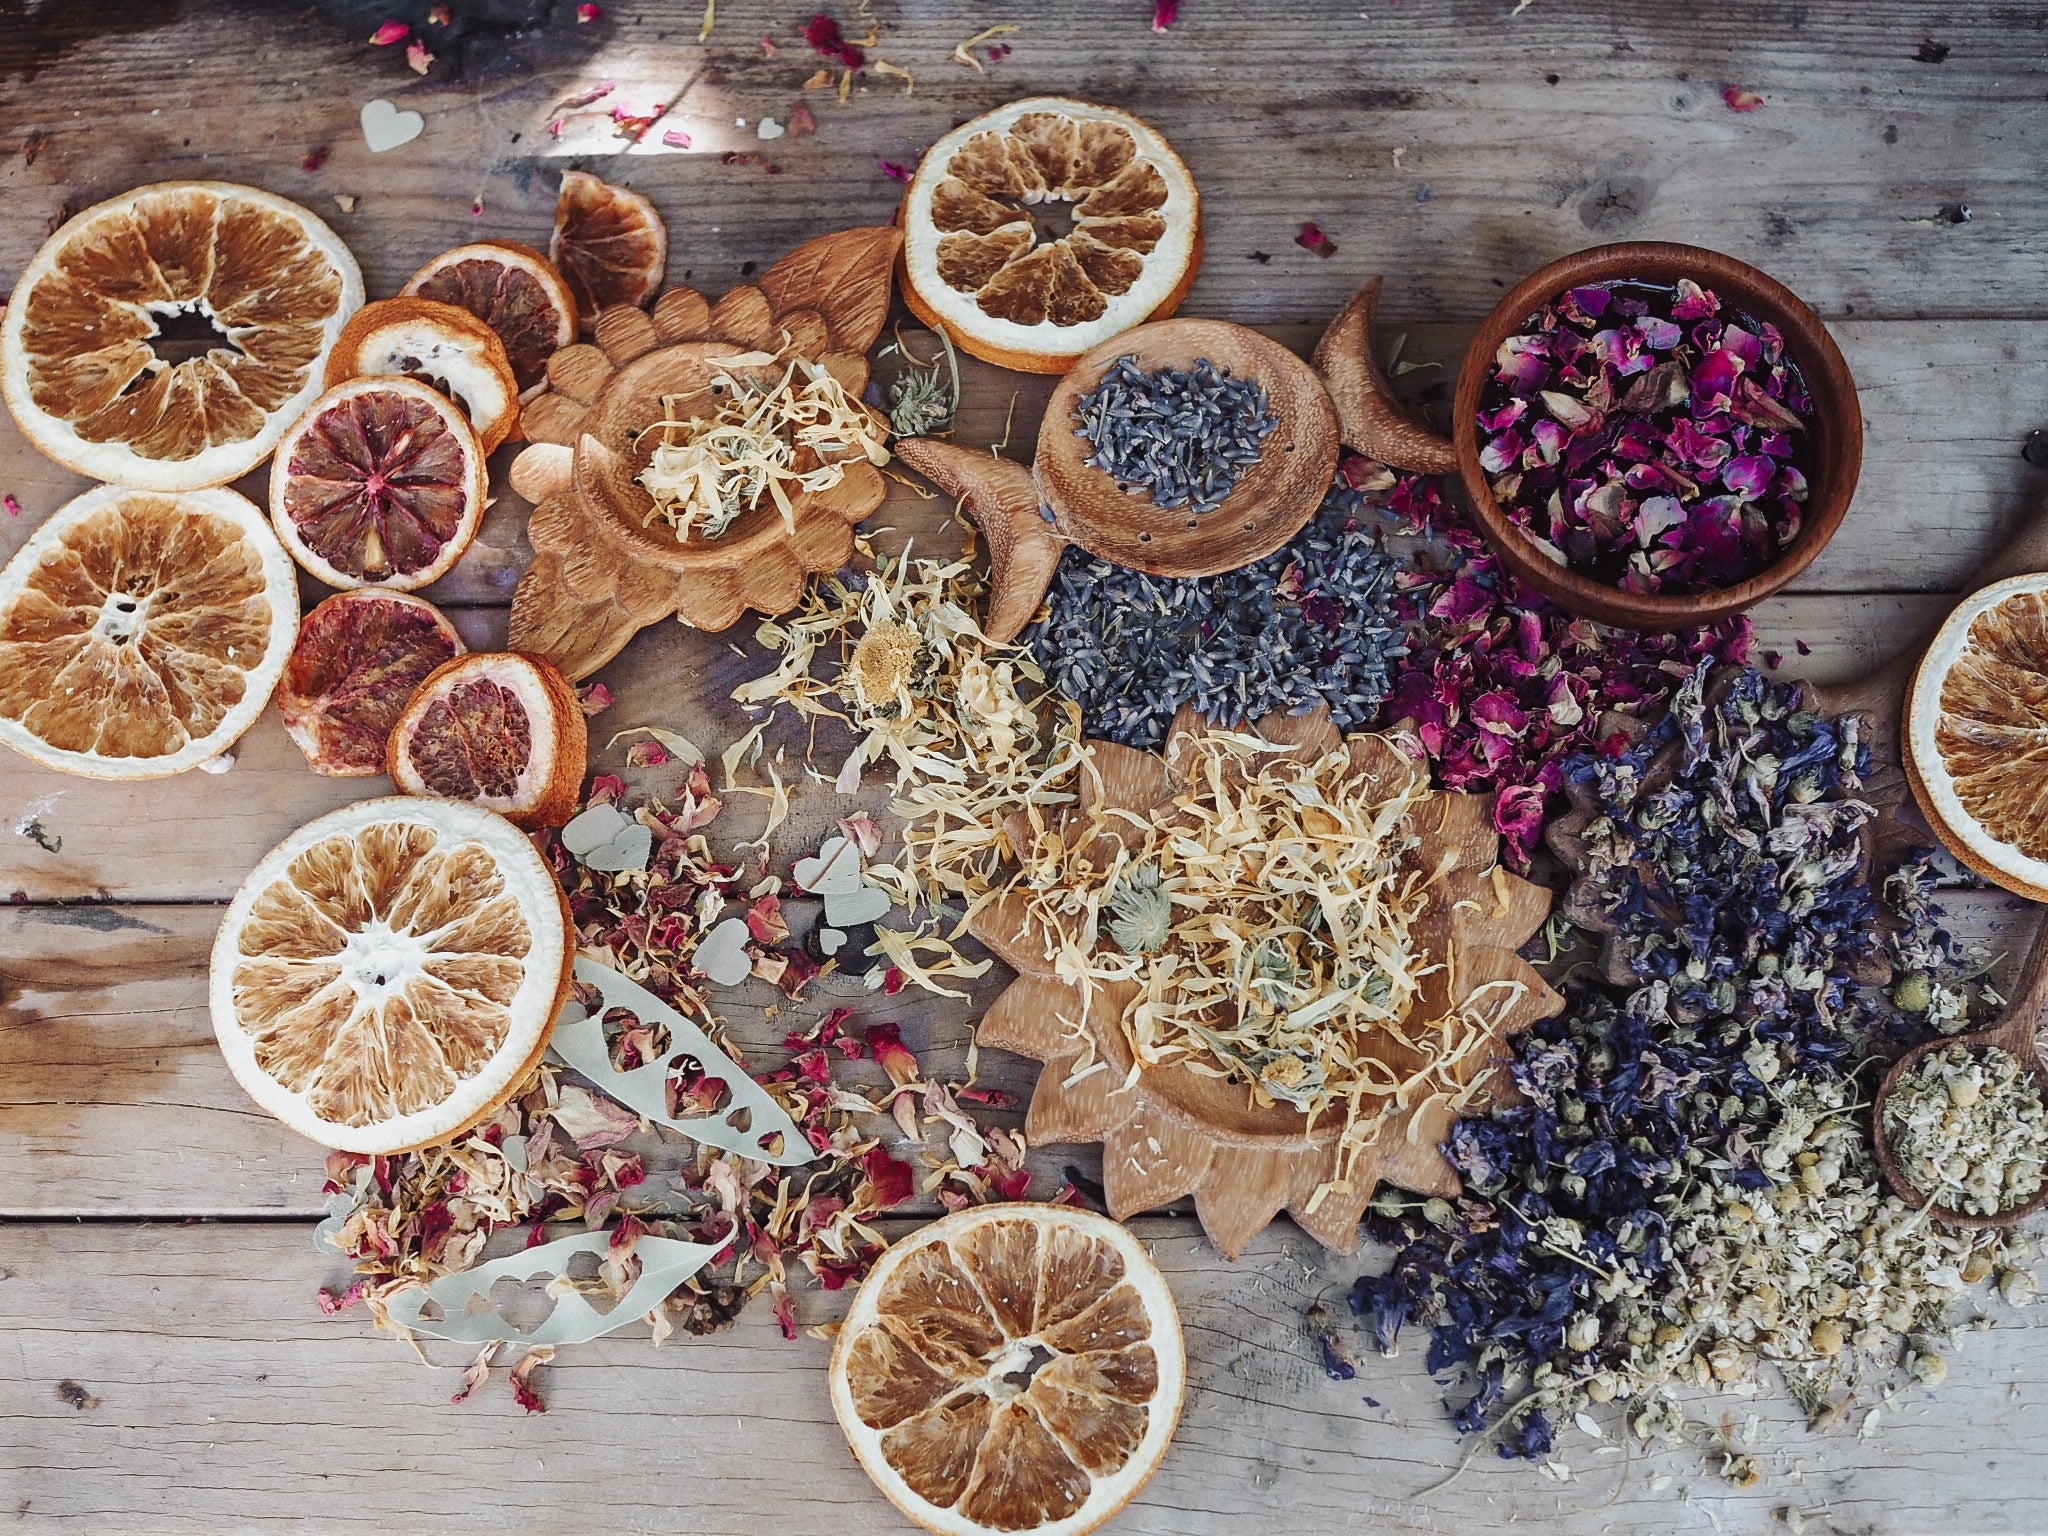 Exploring our senses: 5 Creative Ways to Use Dried Botanicals in Sensory Play